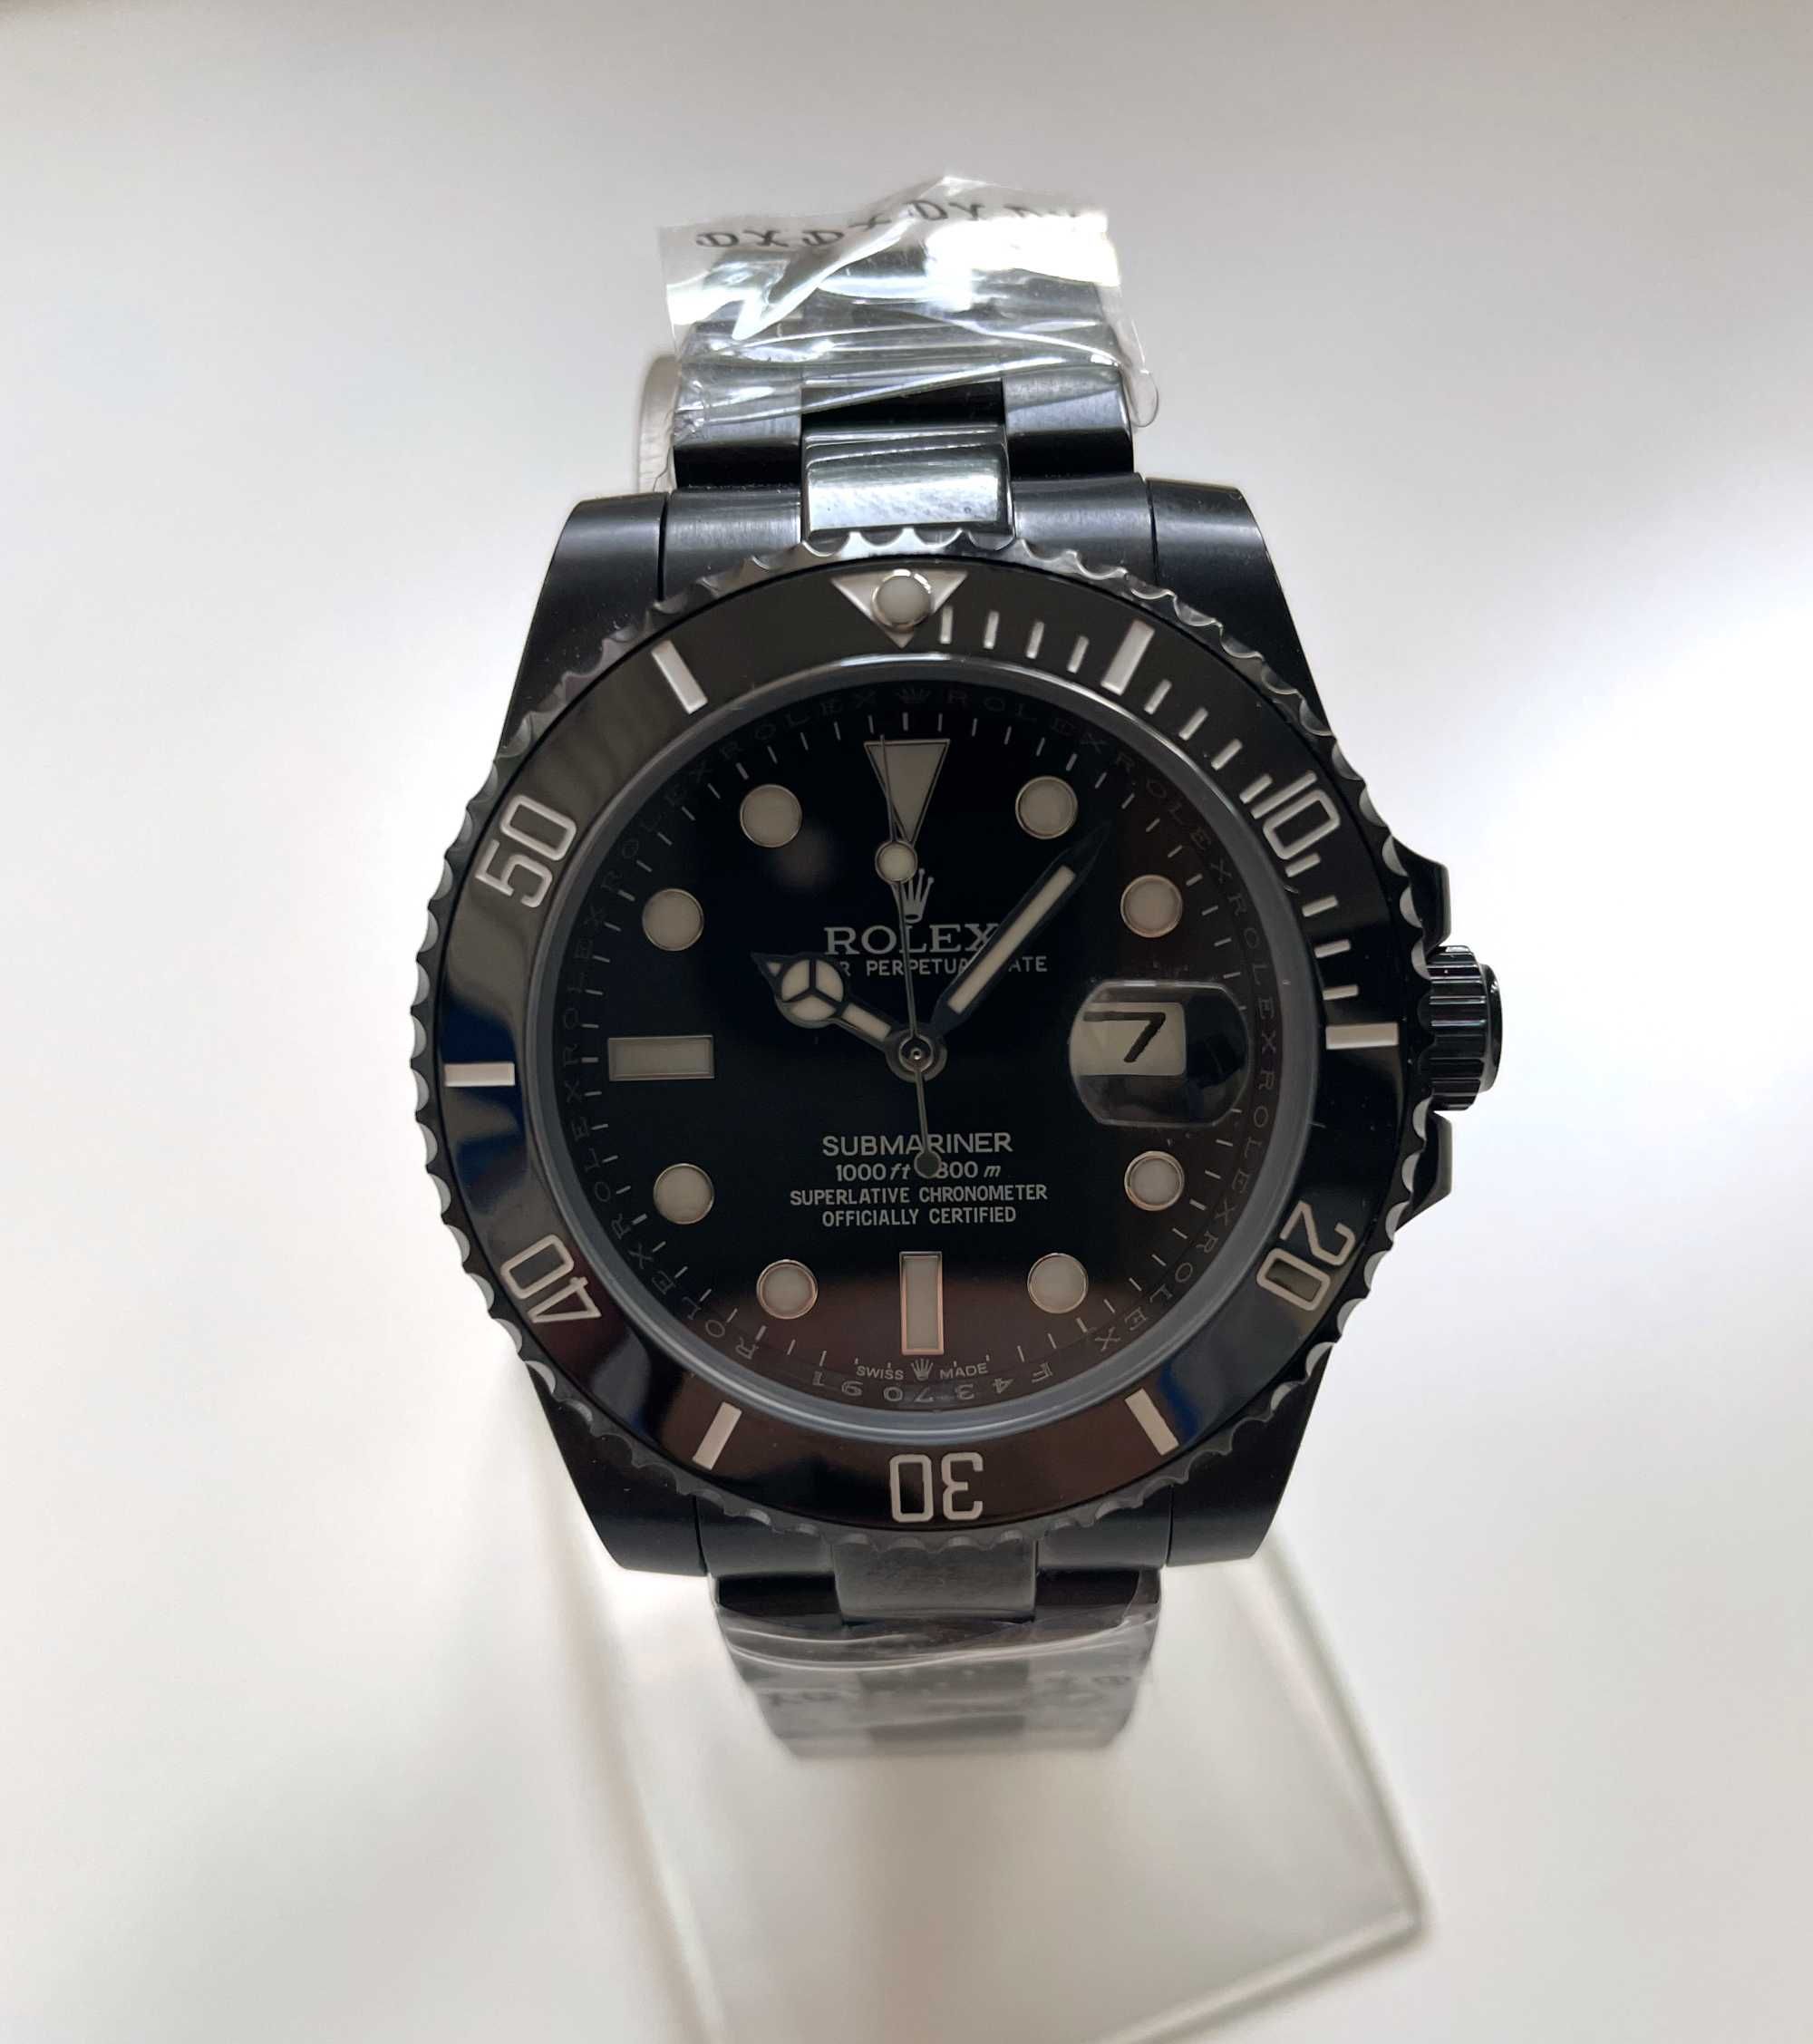 Rolex Submariner Date Black PVD/DLC Coated Stainless Steel!